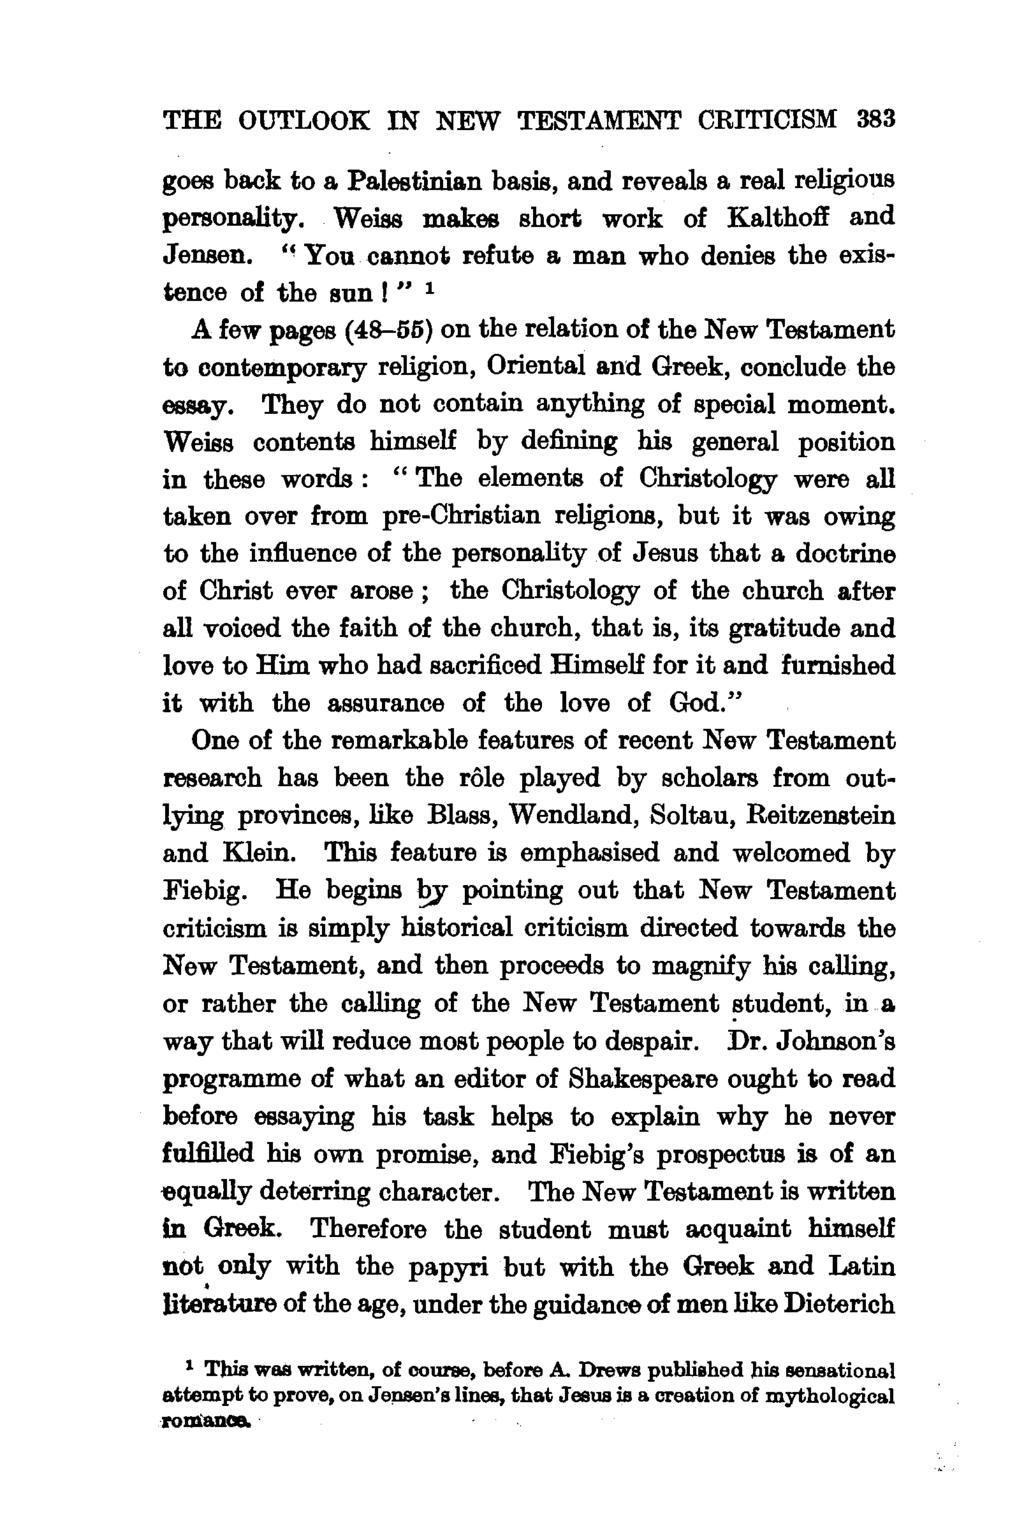 THE OUTLOOK IN NEW TESTAMENT CRITICISM 383 goes back to a Palestinian basis, and reveals a real religious personality. Weiss makes short work of Kalthoff and Jensen.